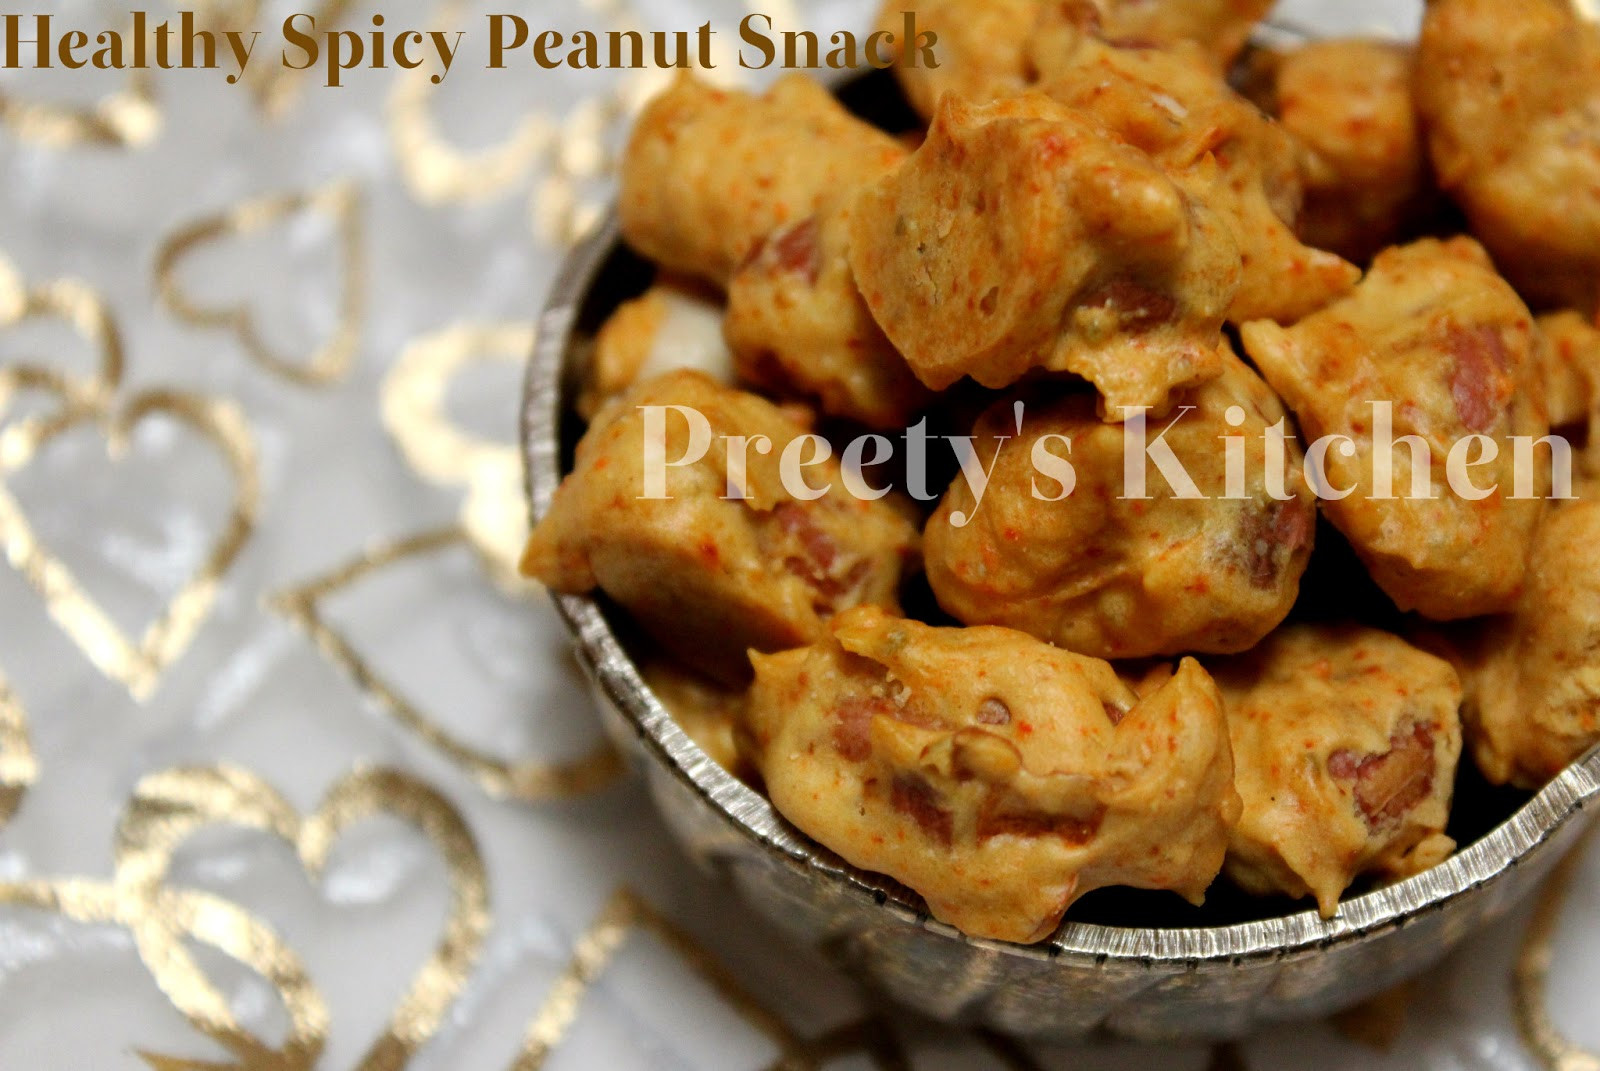 Healthy Spicy Snacks
 Preety s Kitchen Healthy Spicy Peanut Snack in 2 Minutes